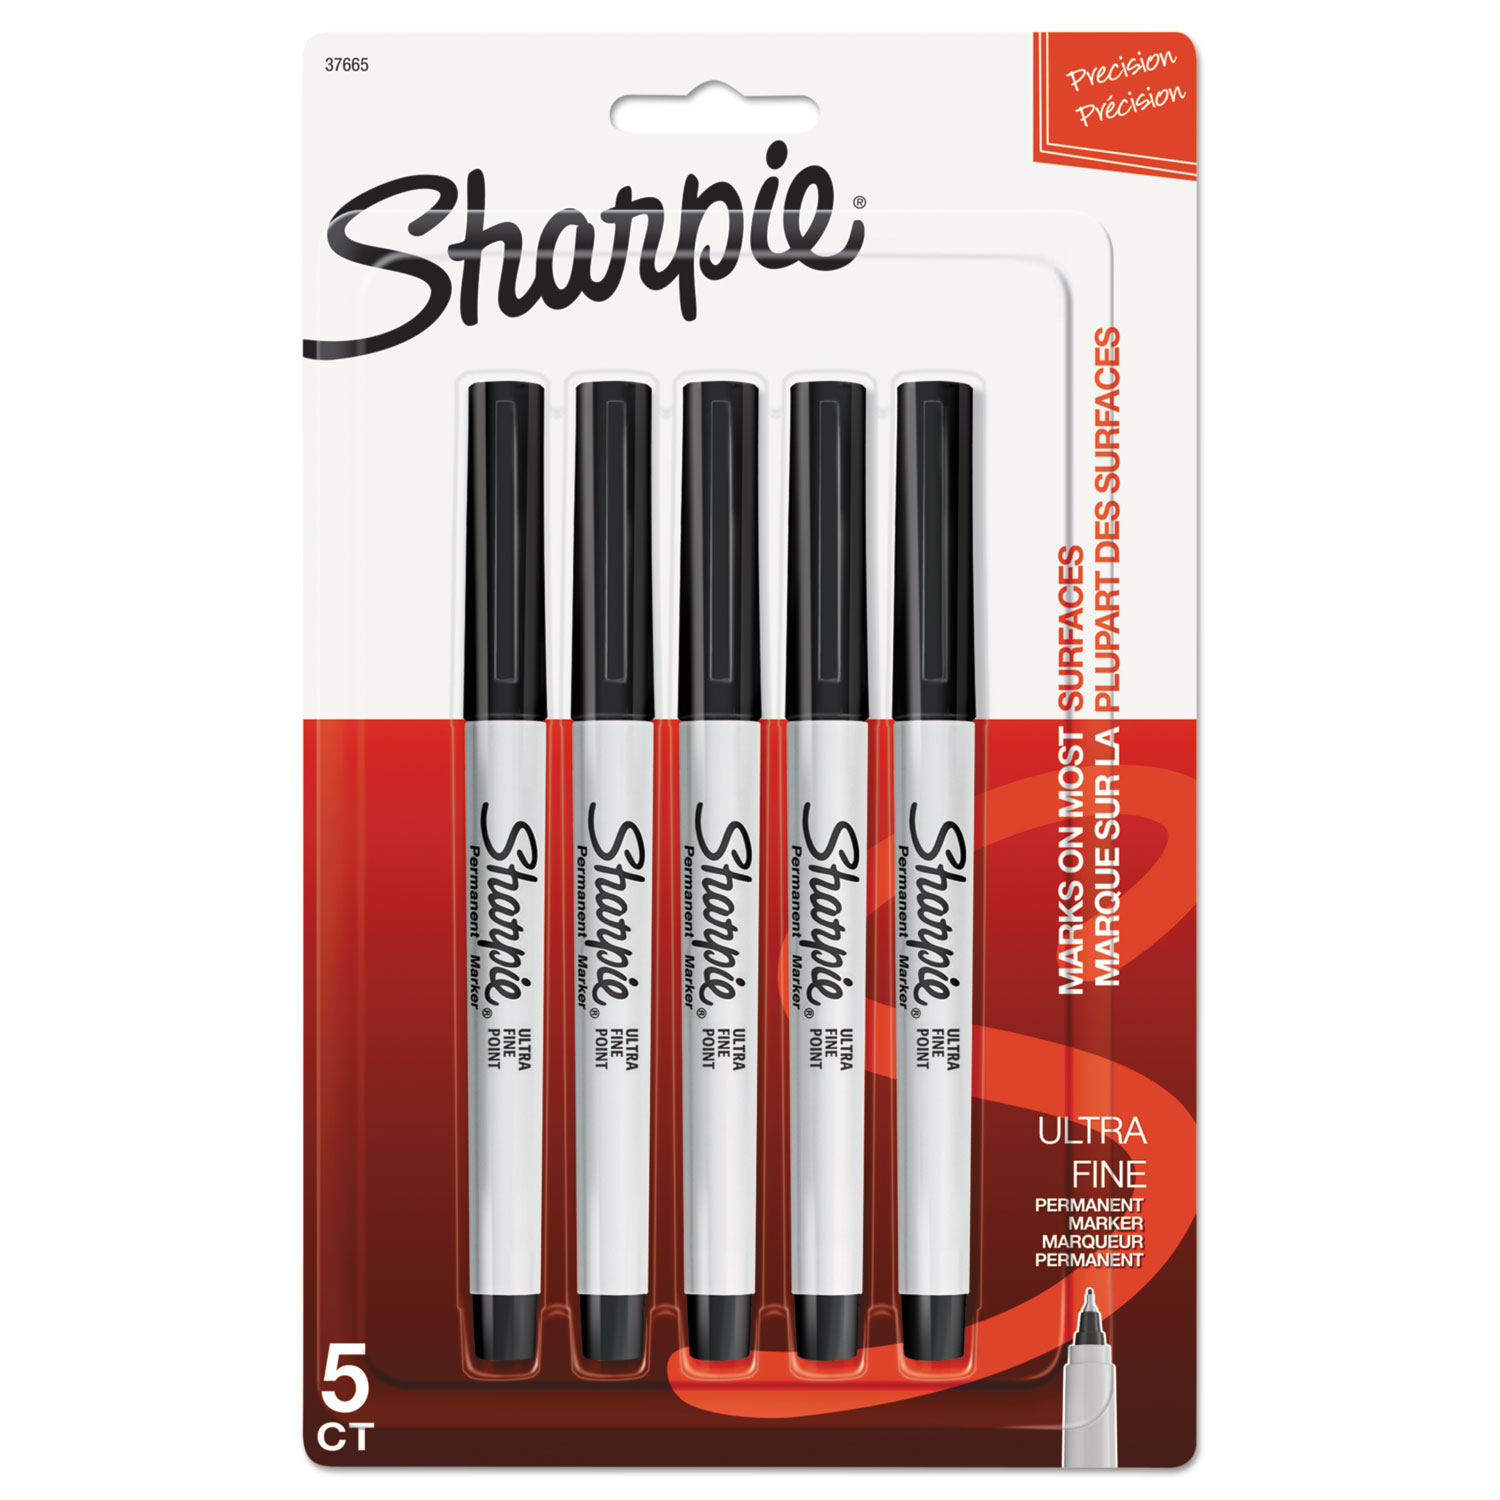  SHARPIE 37001 Permanent Markers, Ultra Fine Point, Black Color,  24 Sets of 12 Markers, 288 Markers Total : Office Products